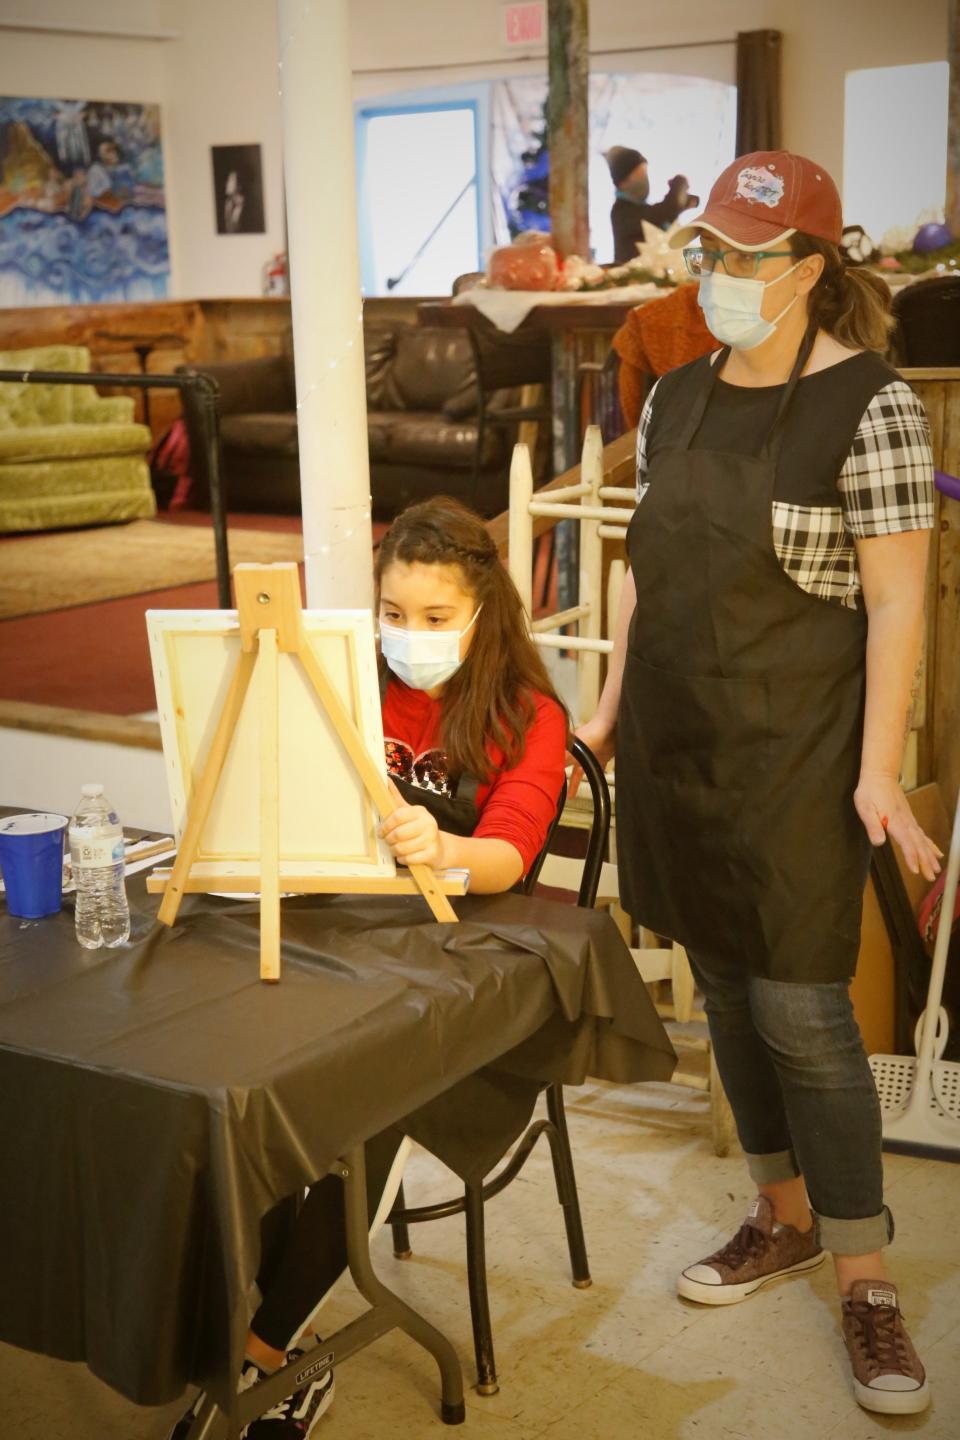 Christy Clugston of Inspire HeArt works with a student during a December 2020 painting class at the organization's headquarters at the Aztec Theater in Aztec.